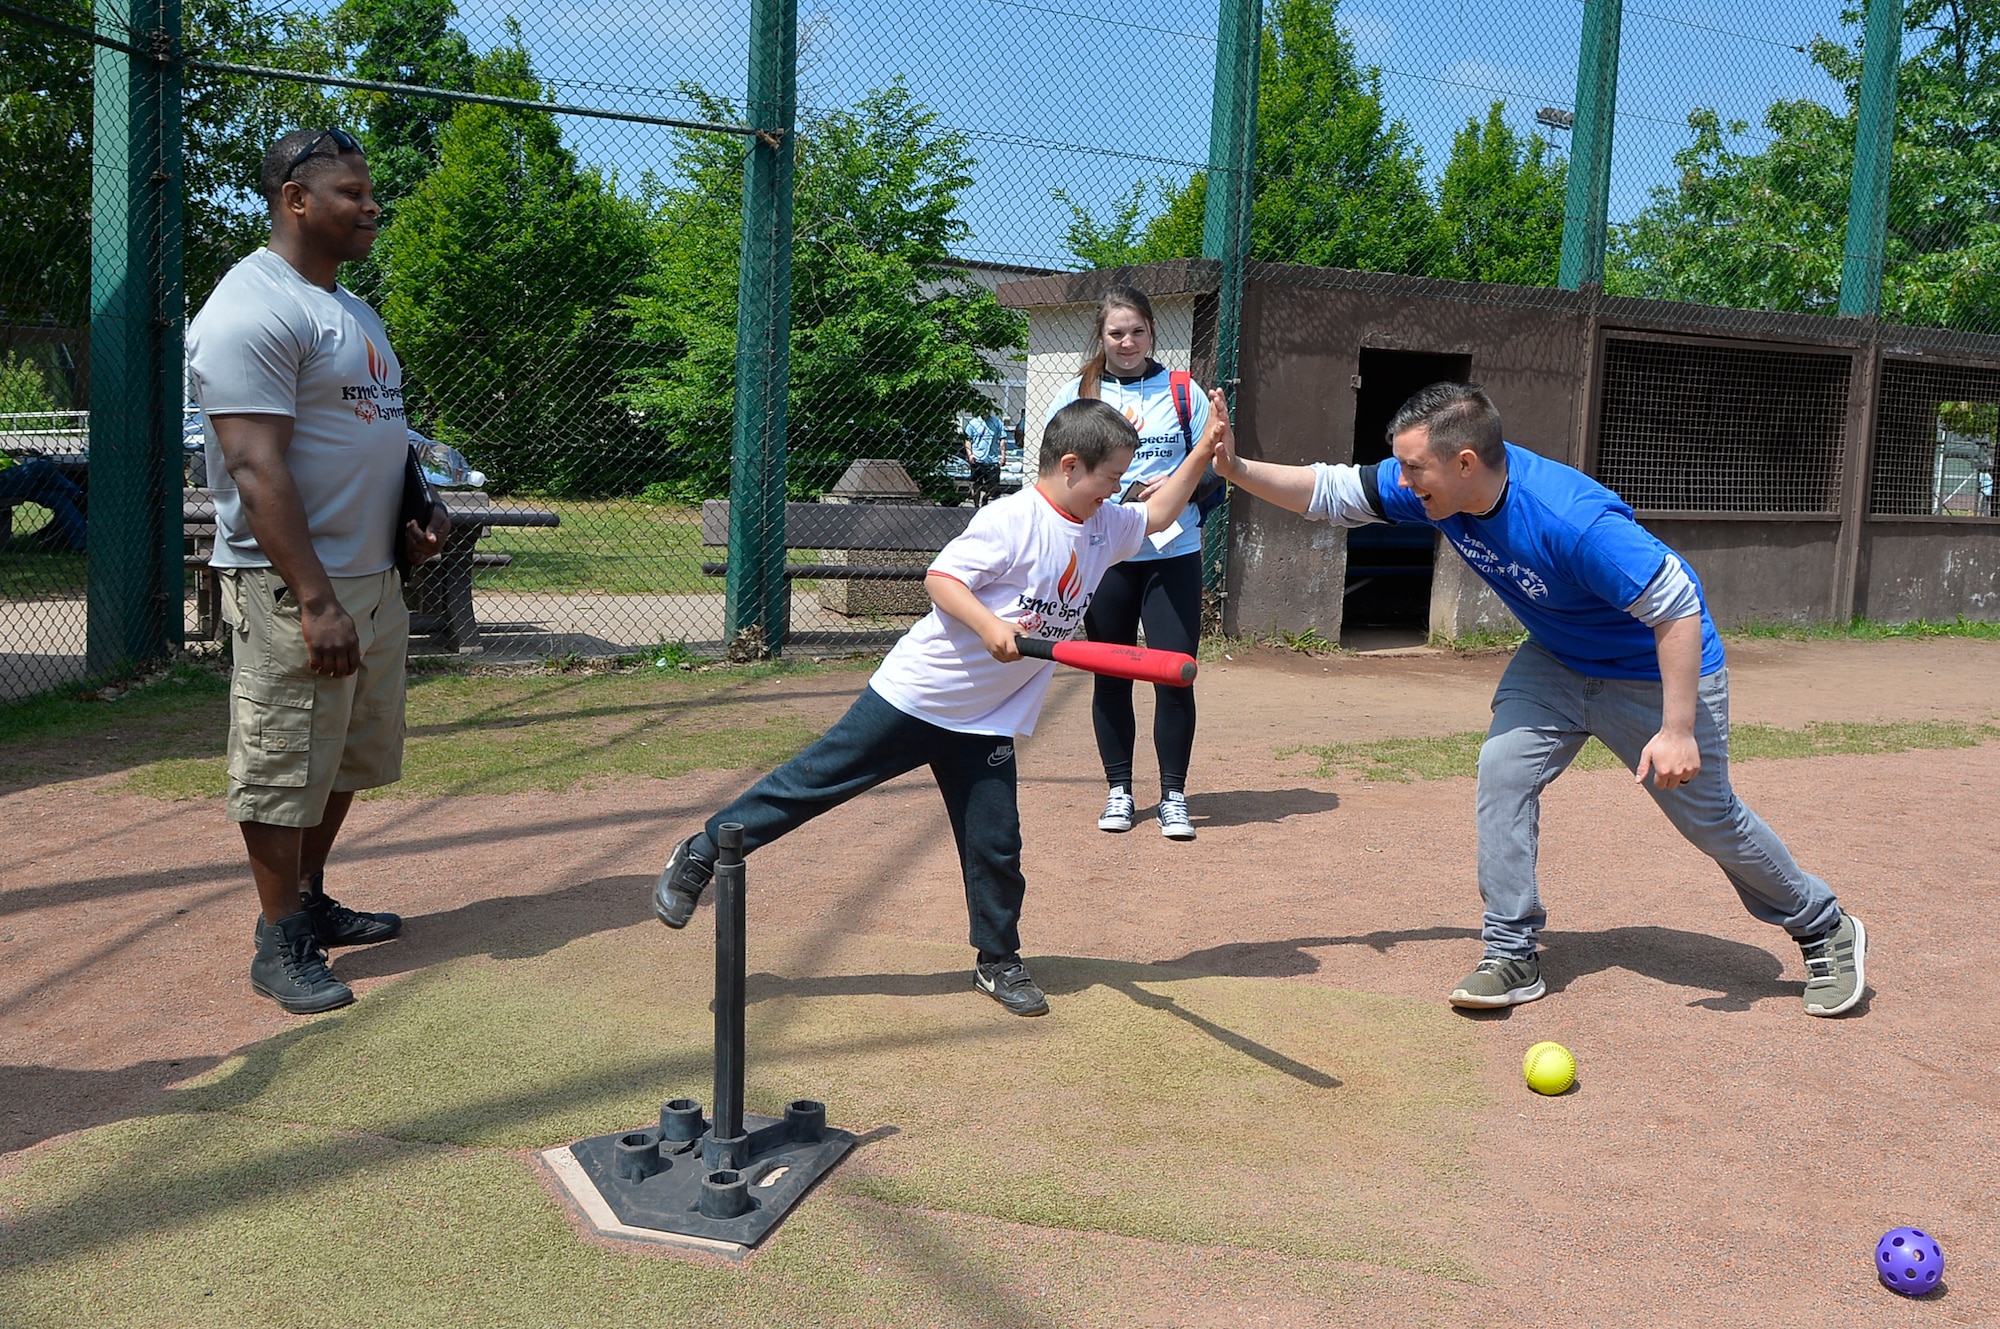 Senior Airman Michael Therrien, 86th Maintenance Squadron aerospace ground equipment technician, far right, congratulates a Kaiserslautern Military Community Summer Special Olympian on Ramstein Air Base, Germany, May 18, 2018. Games at the event included soccer ball kicking, football throwing, basketball shooting, homerun derby, and running. (U.S. Air Force photo by Senior Airman Joshua Magbanua)